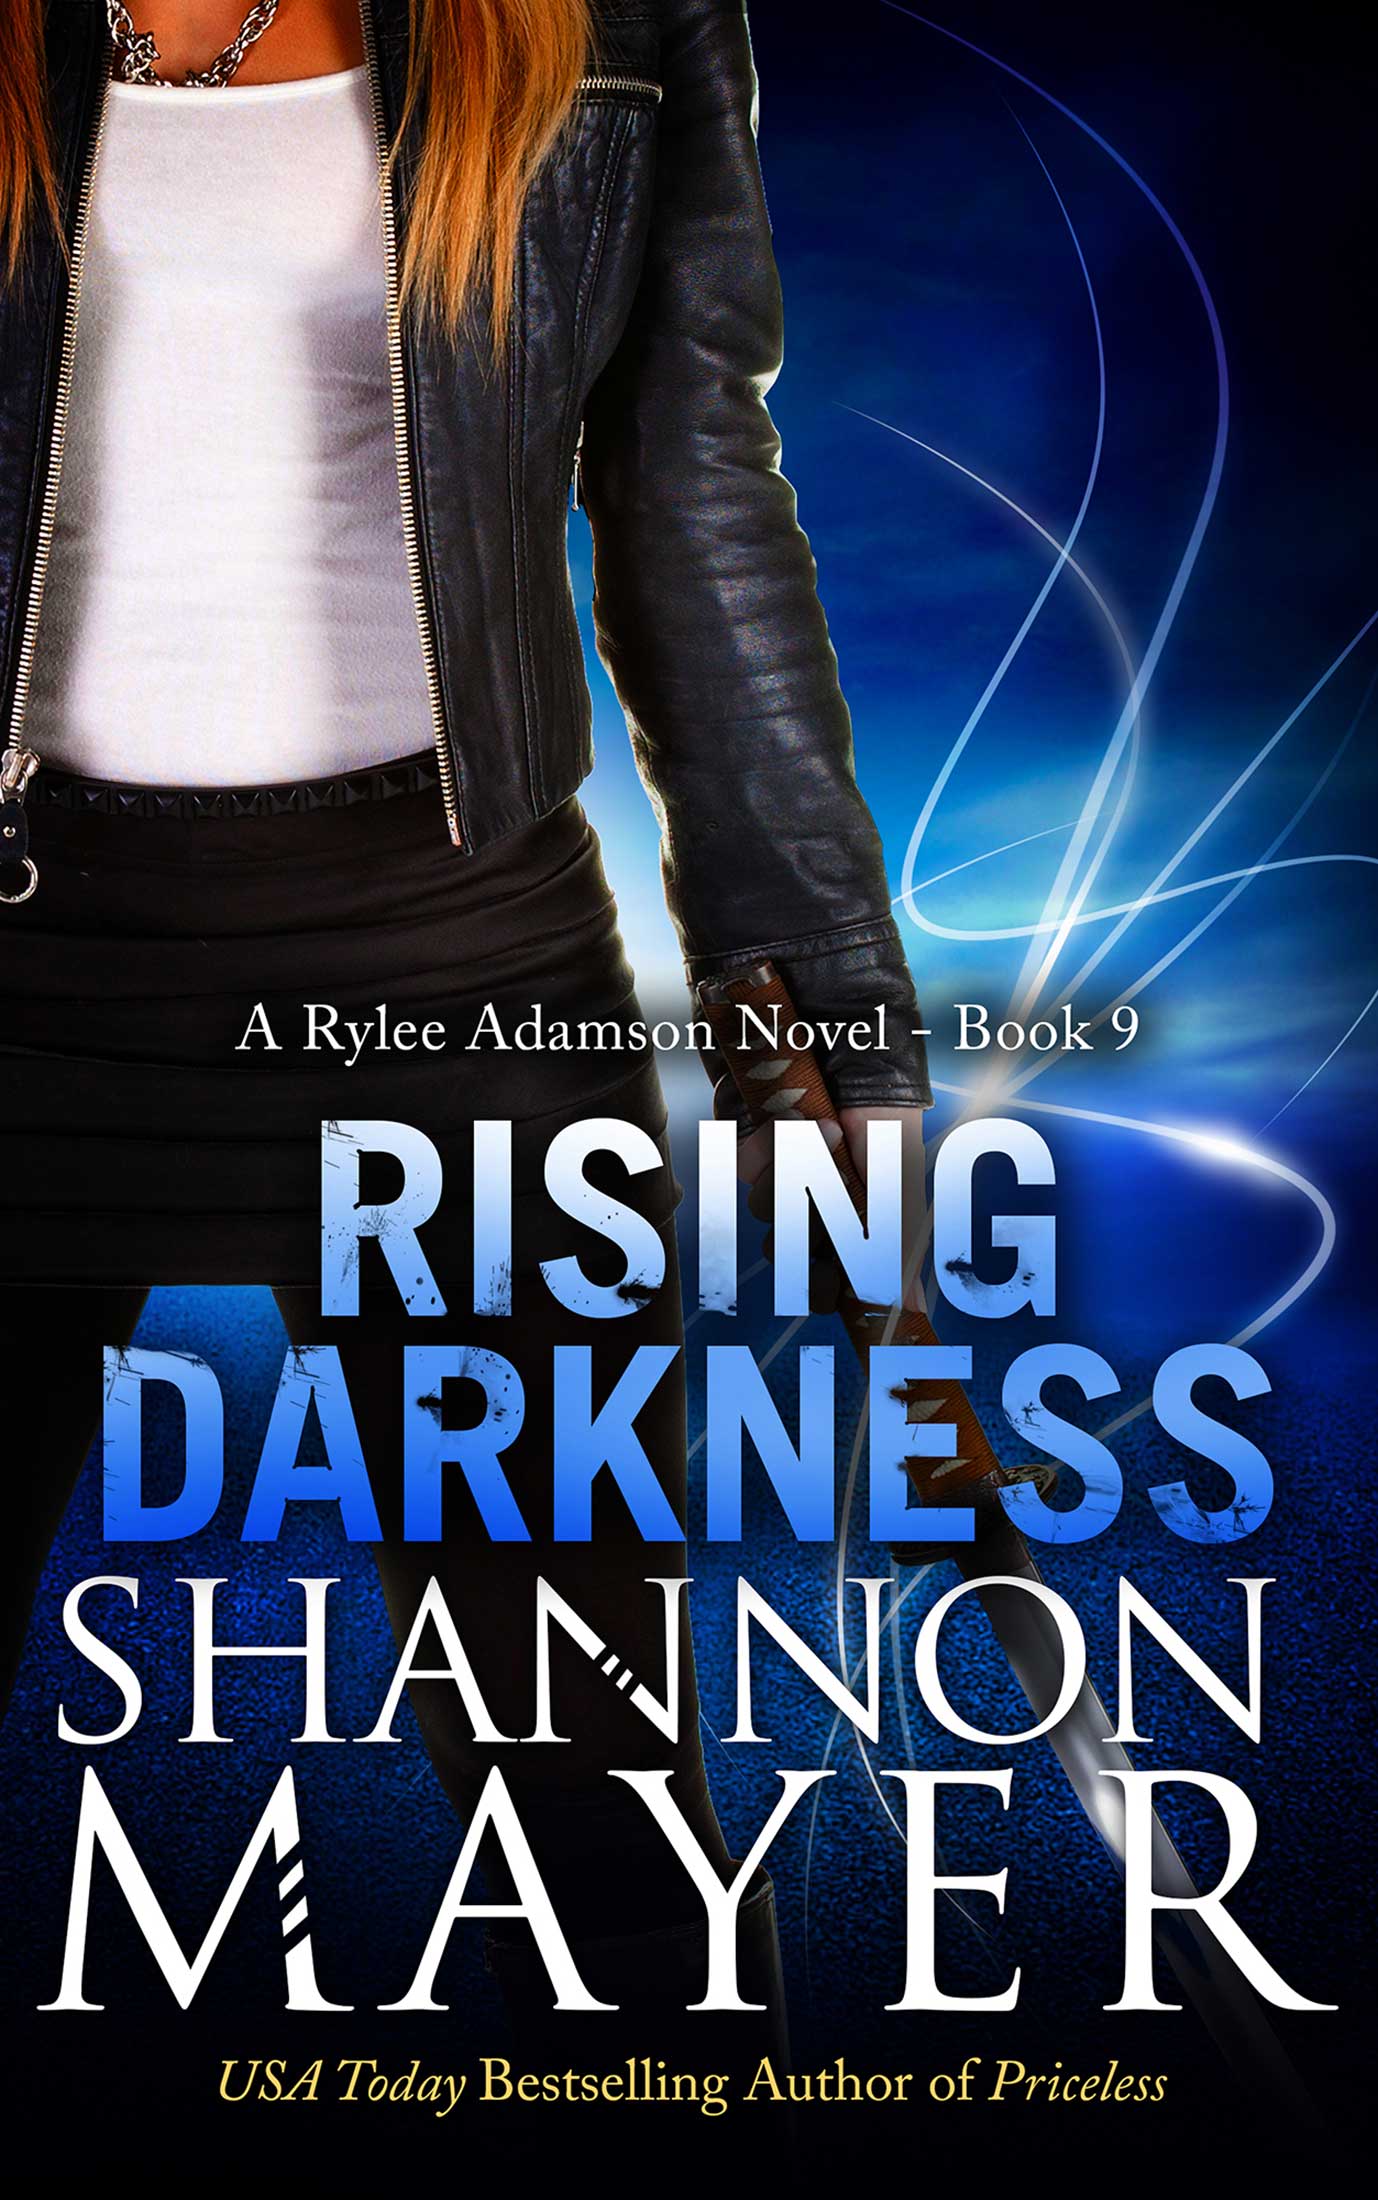 Rising Darkness (A Rylee Adamson Novel, Book 9) (2015) by Shannon Mayer